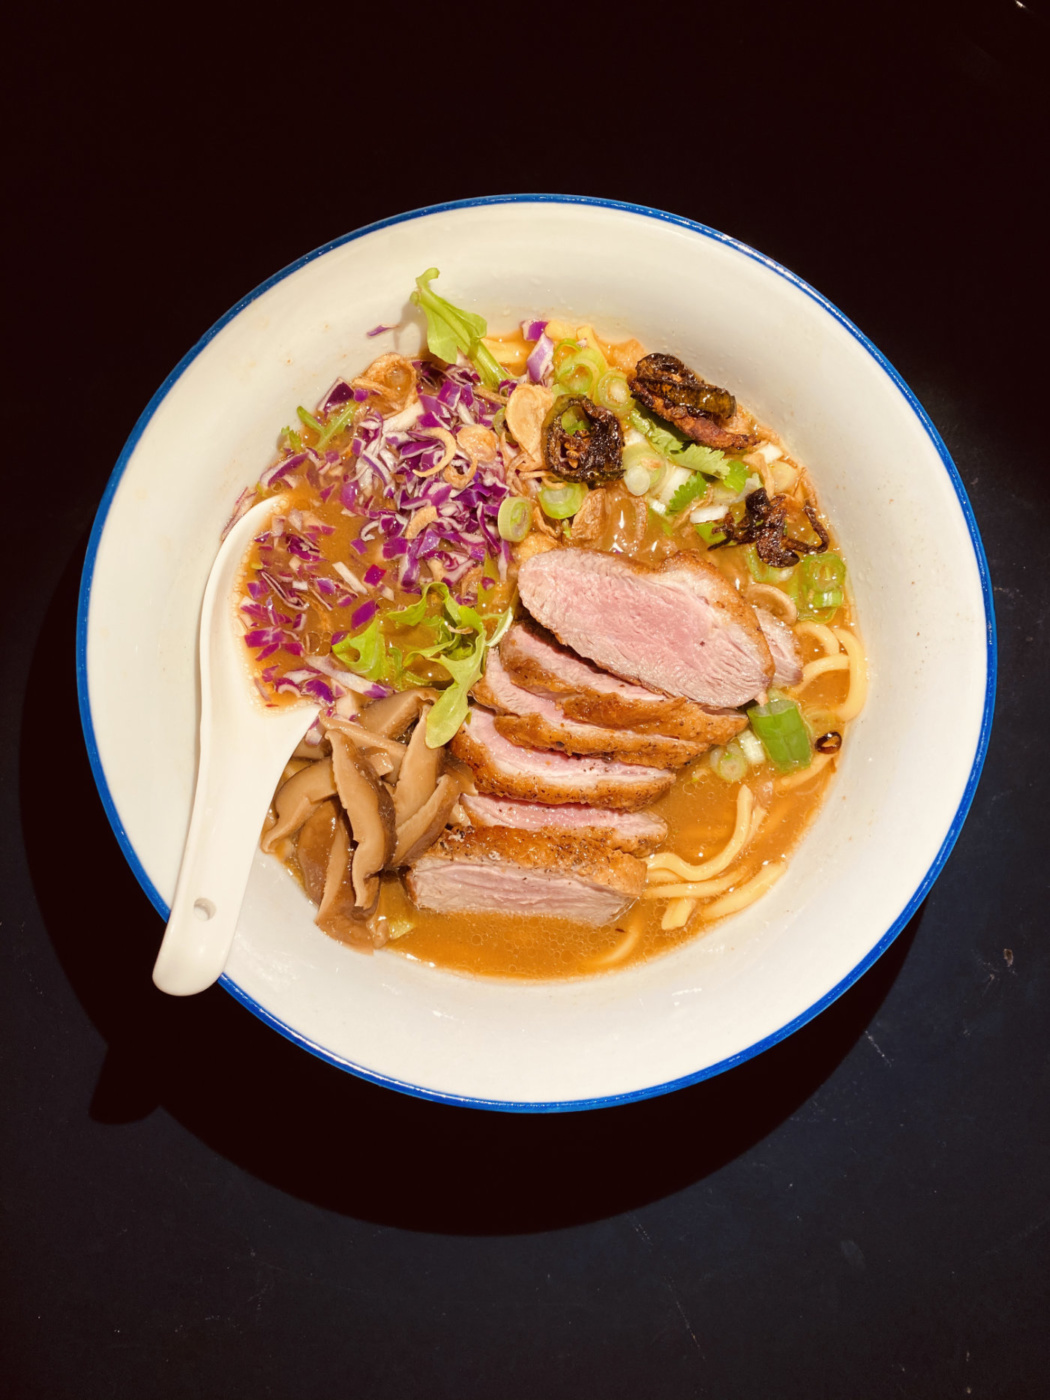 A long simmering broth made of Shiitake mushrooms and Miso, topped off with thinly sliced crispy seared duck breast, fried shallots and jalapeño, arugula, red cabbage, scallions, cilantro and truffle oil. Try also to substitute arugula for some charred bok-choy or gai-lan.